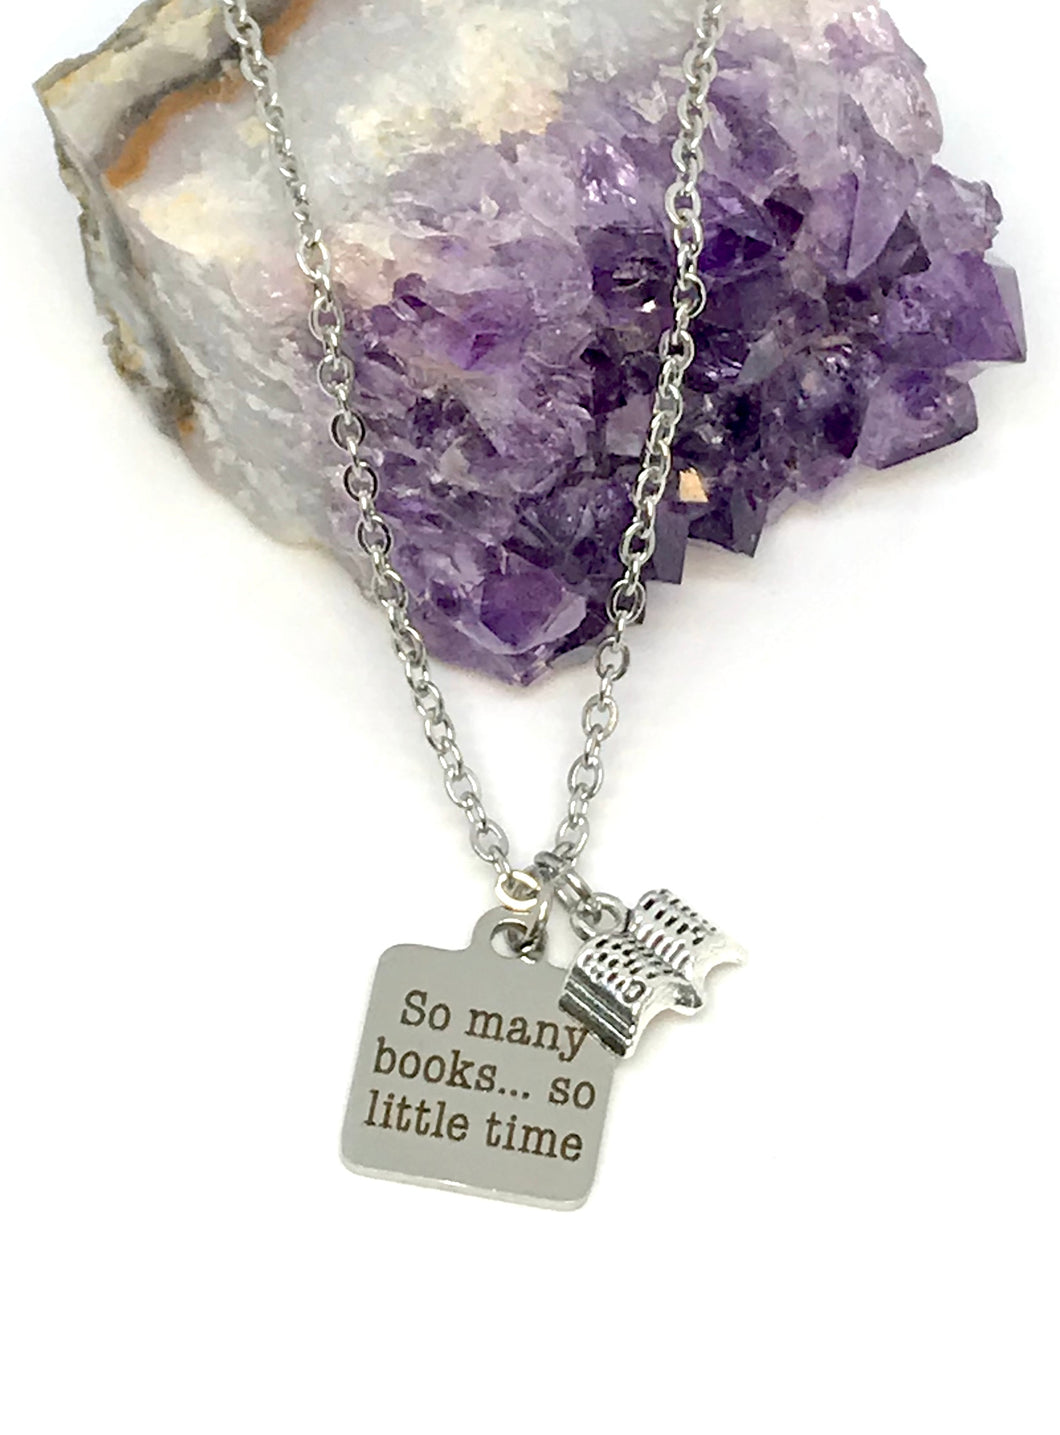 “So many books... so little time” 3-in-1 Charm Necklace (Stainless Steel)